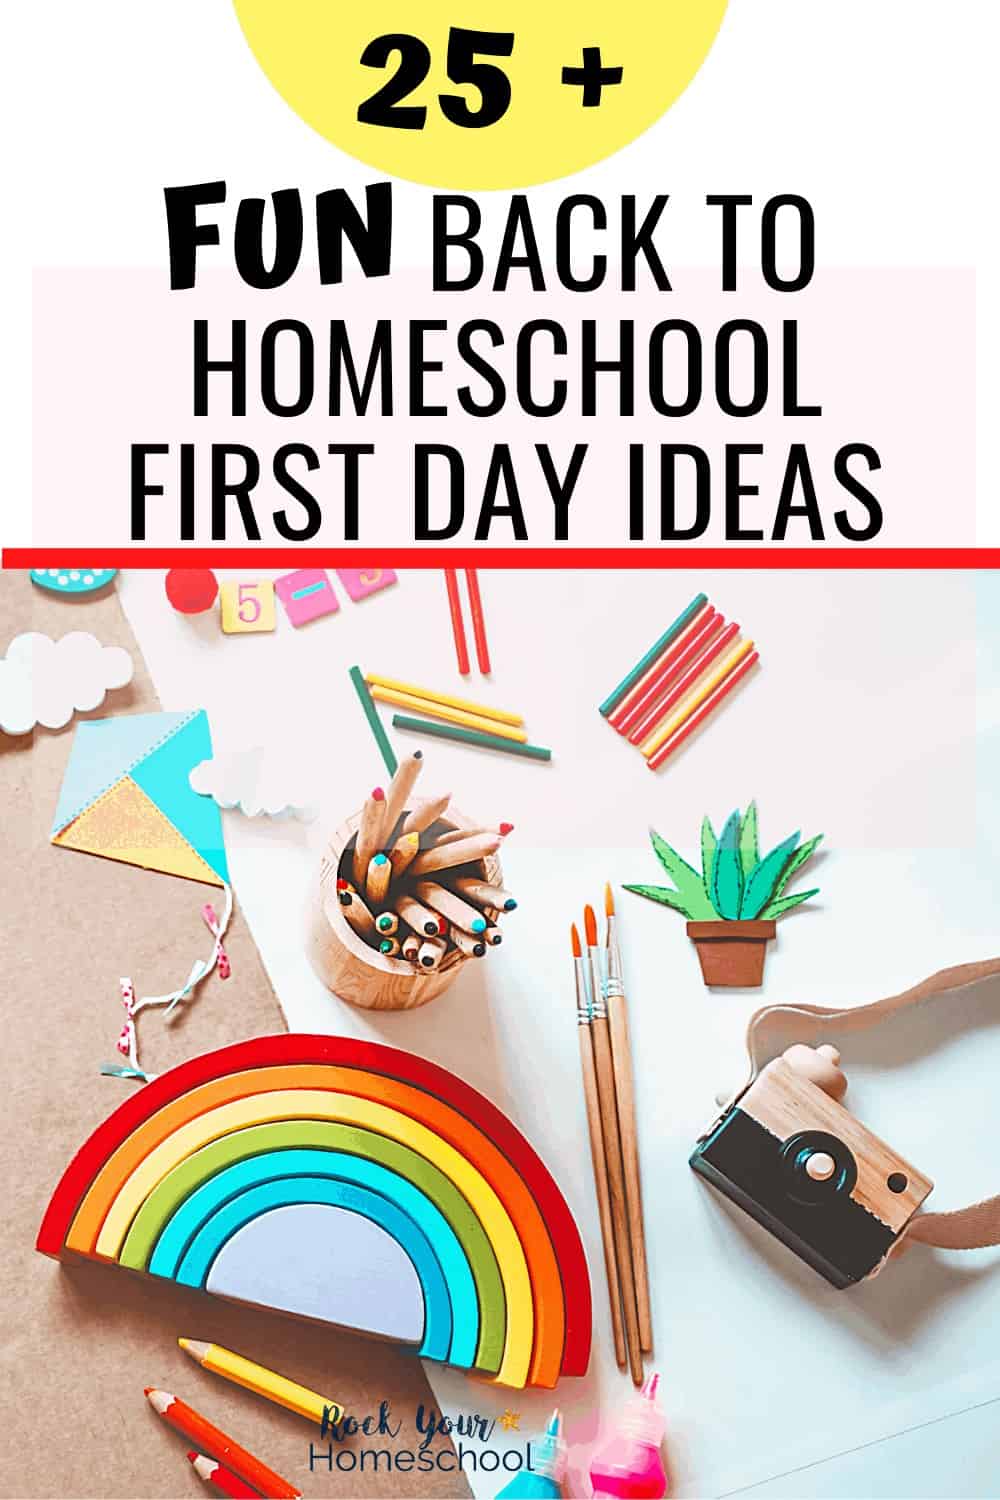 Back To Homeschool First Day Ideas: 25+ Fun Ways to Enjoy With Your Kids